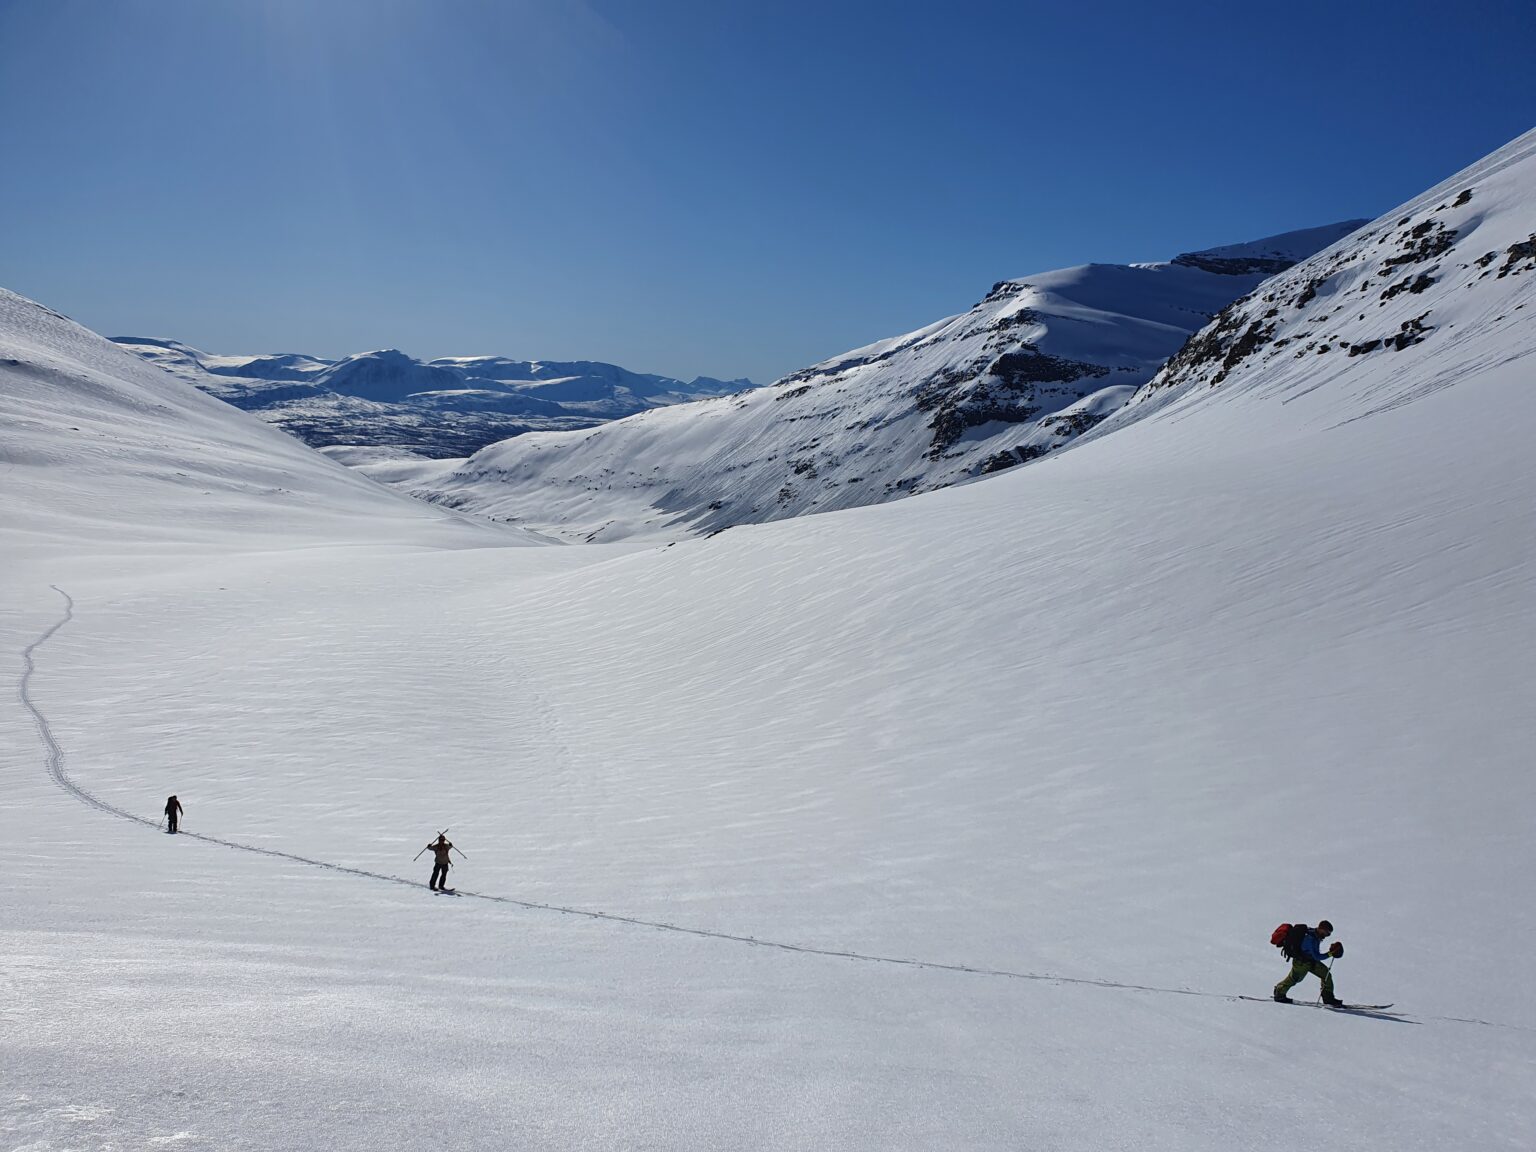 Ski touring up to the col between Brattlifjellet and Nerotinden